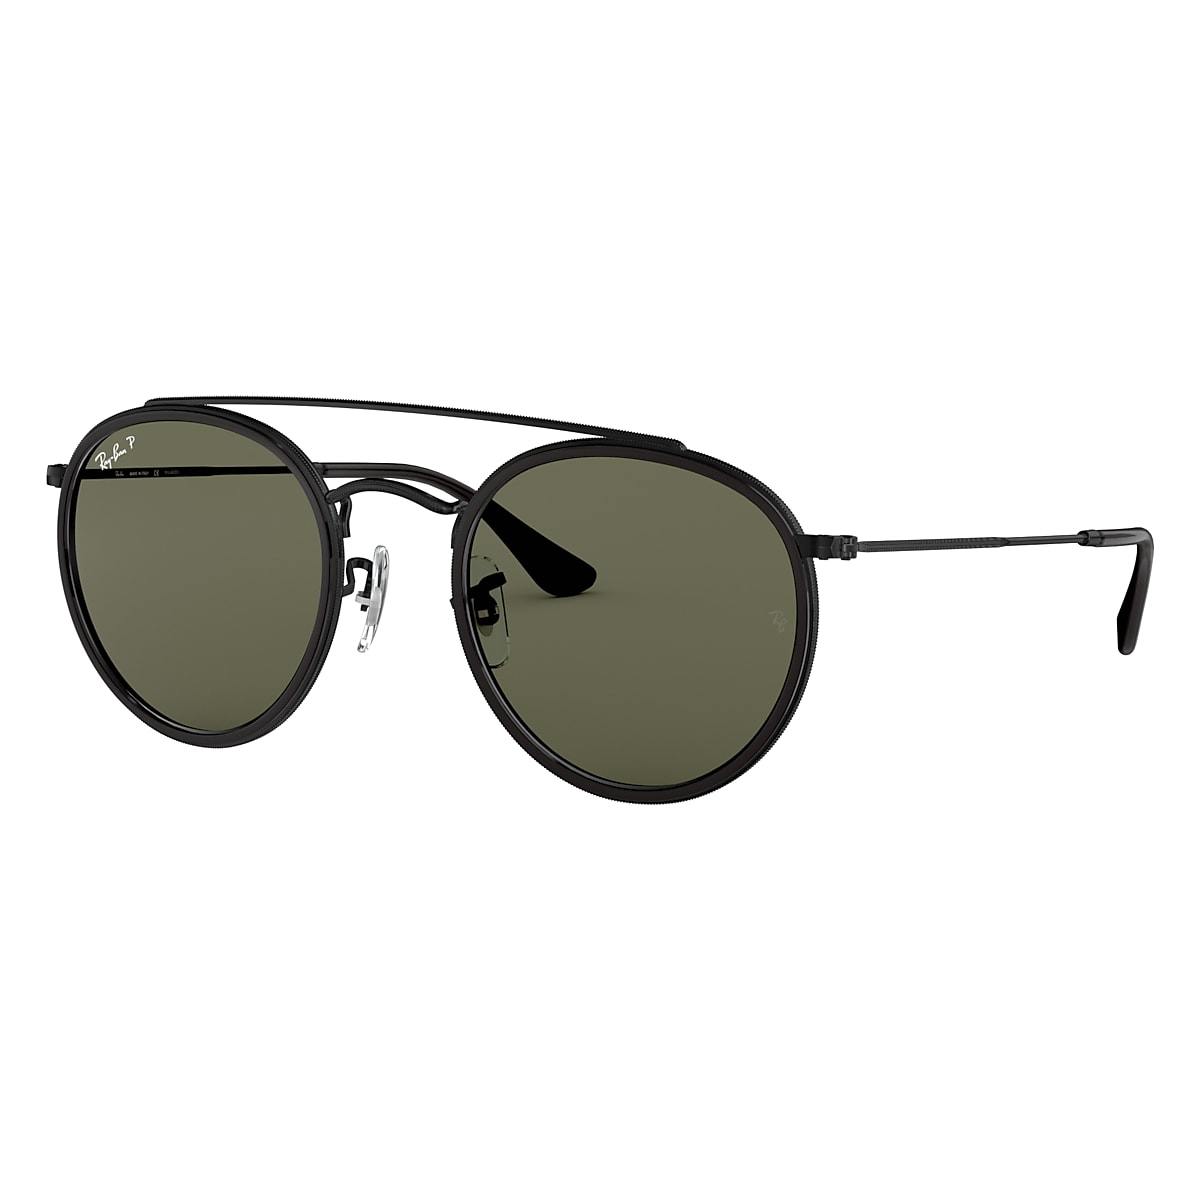 ROUND DOUBLE BRIDGE Sunglasses in Black and Green - RB3647N | Ray 